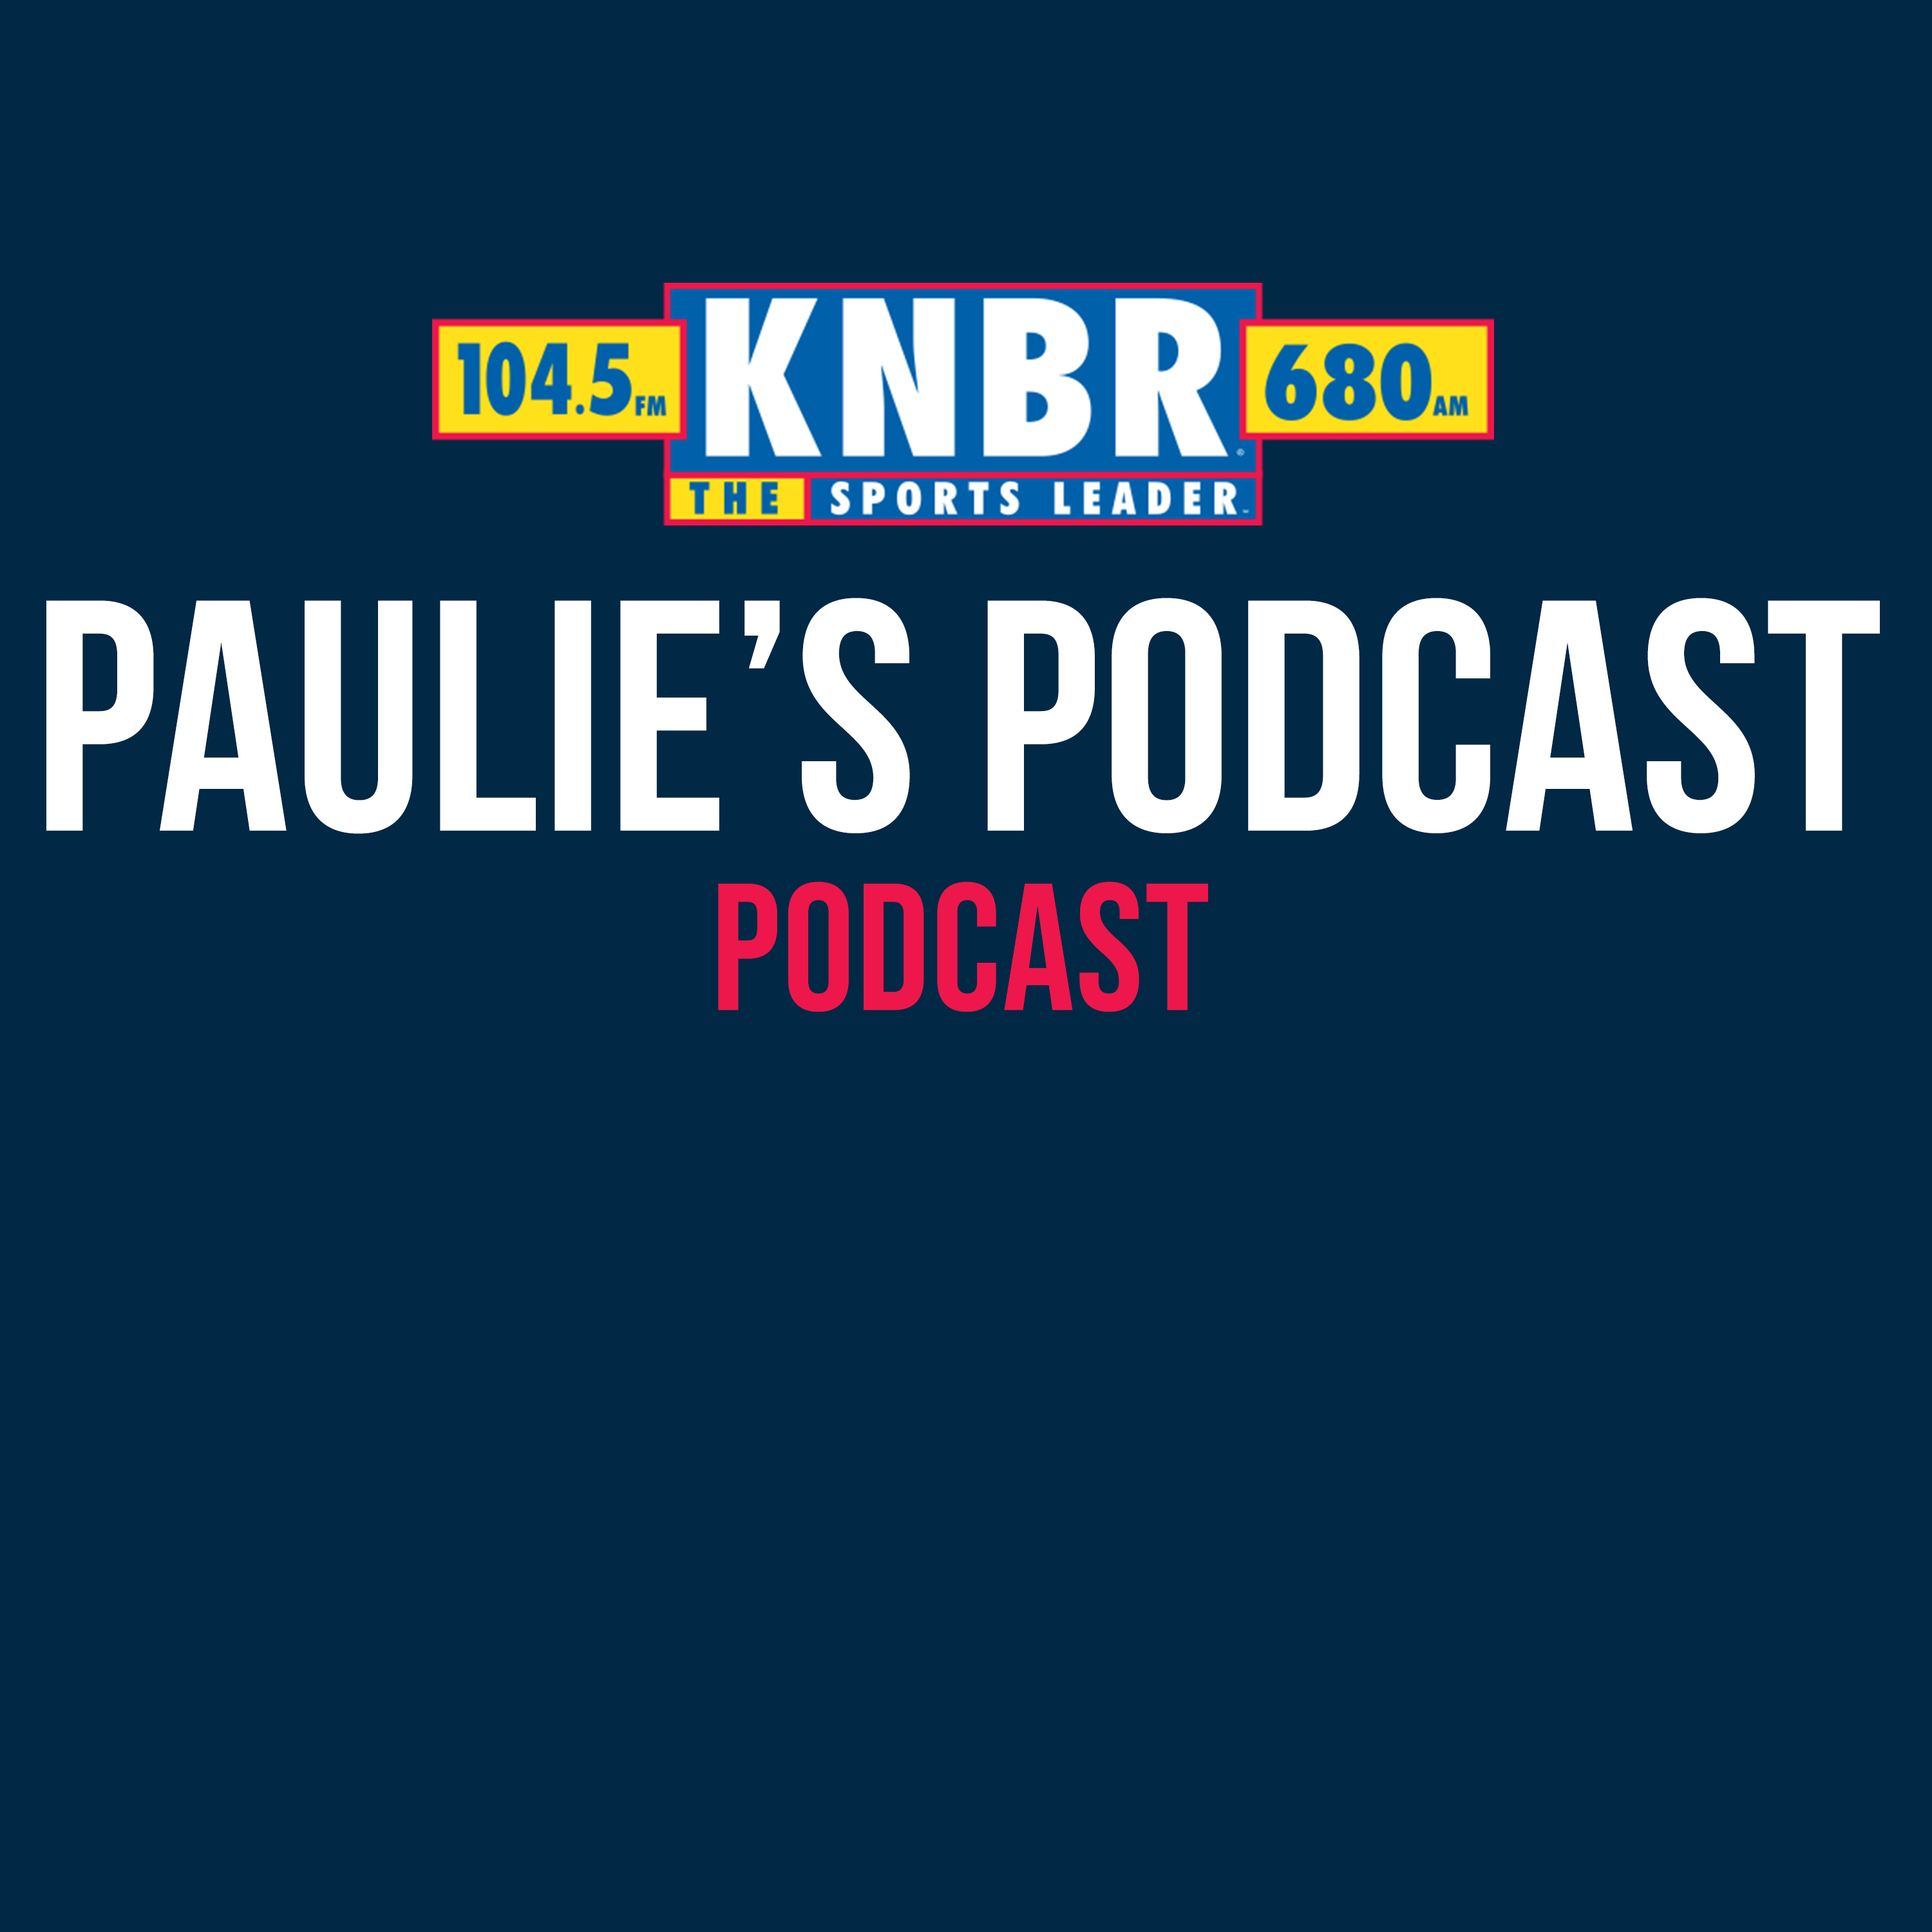 11/10: Talking Niners struggles, Paulie's new Twitter (X) account and more with KNBR's Markus "The Waterboy" Boucher!